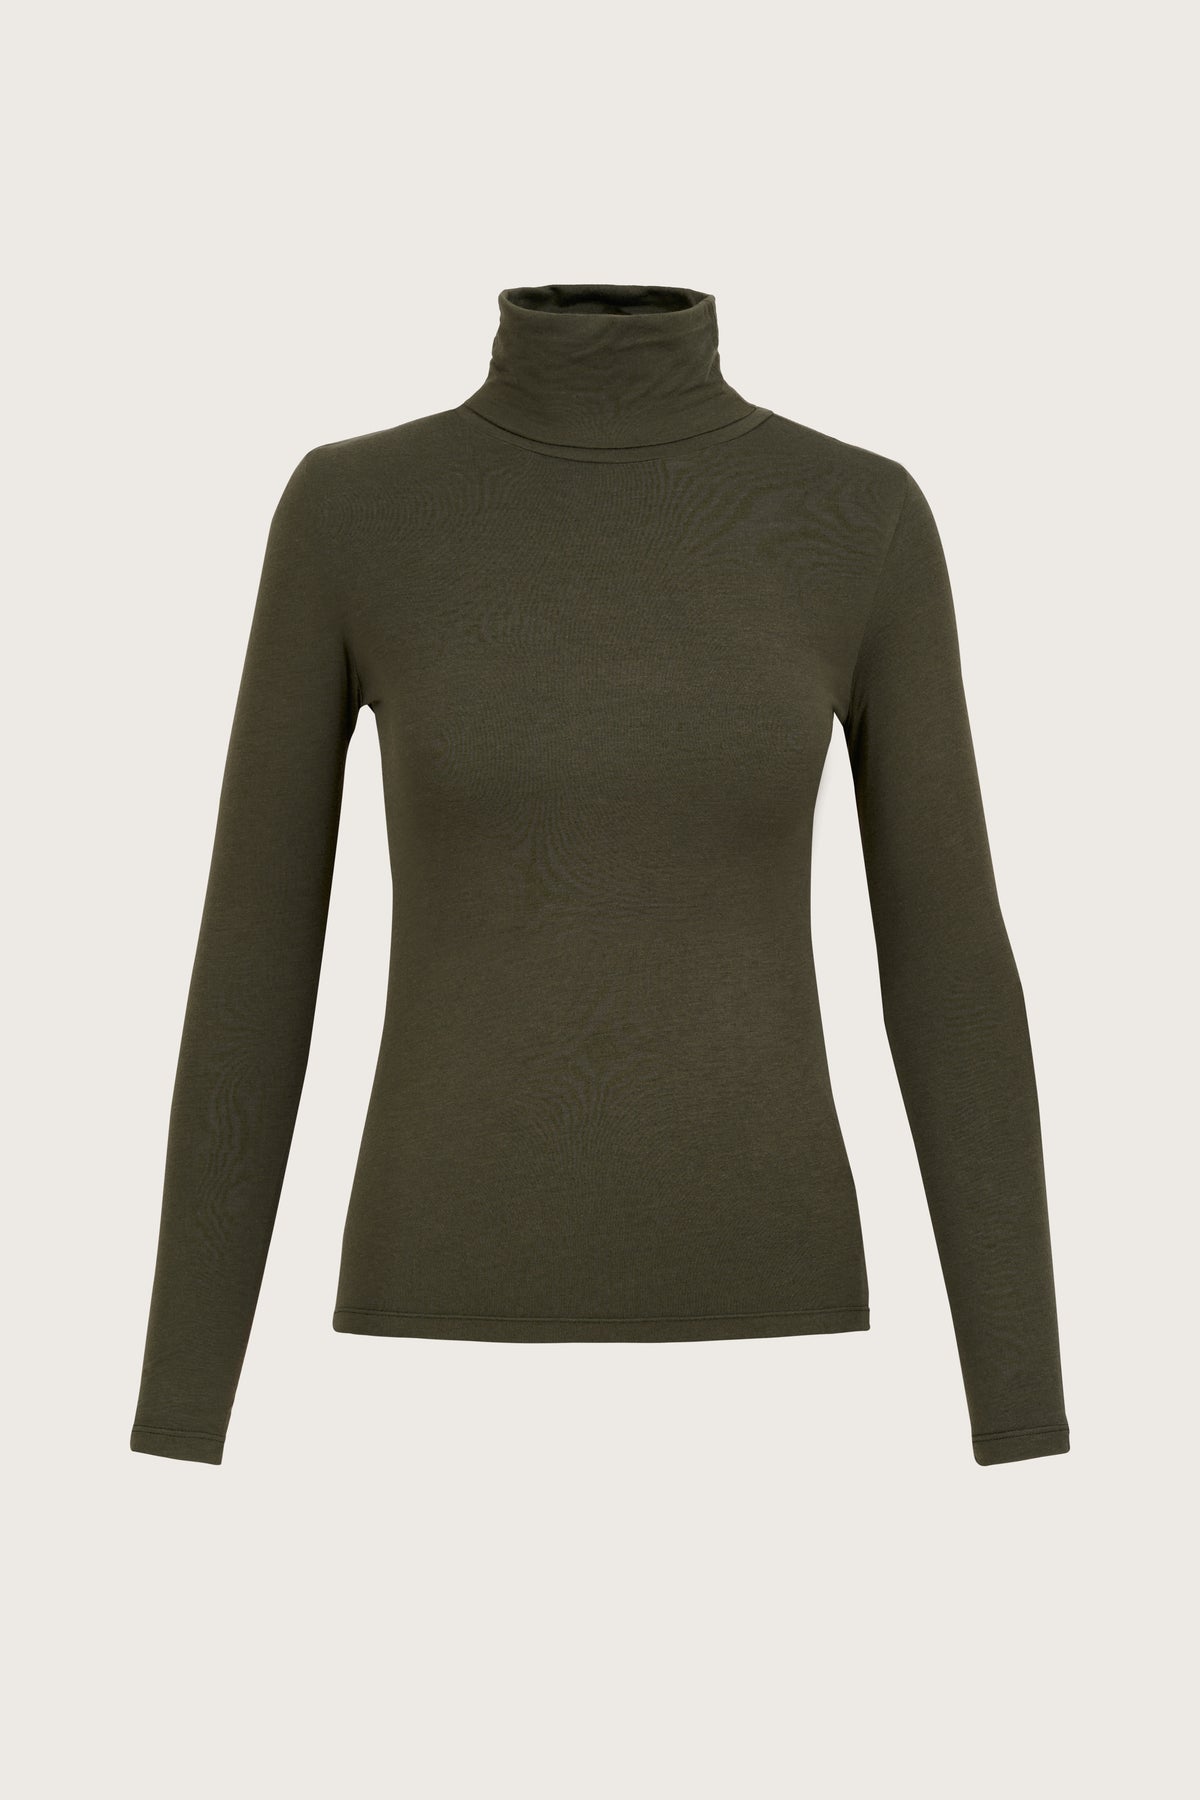 Forest green fine cashmere blend roll neck top